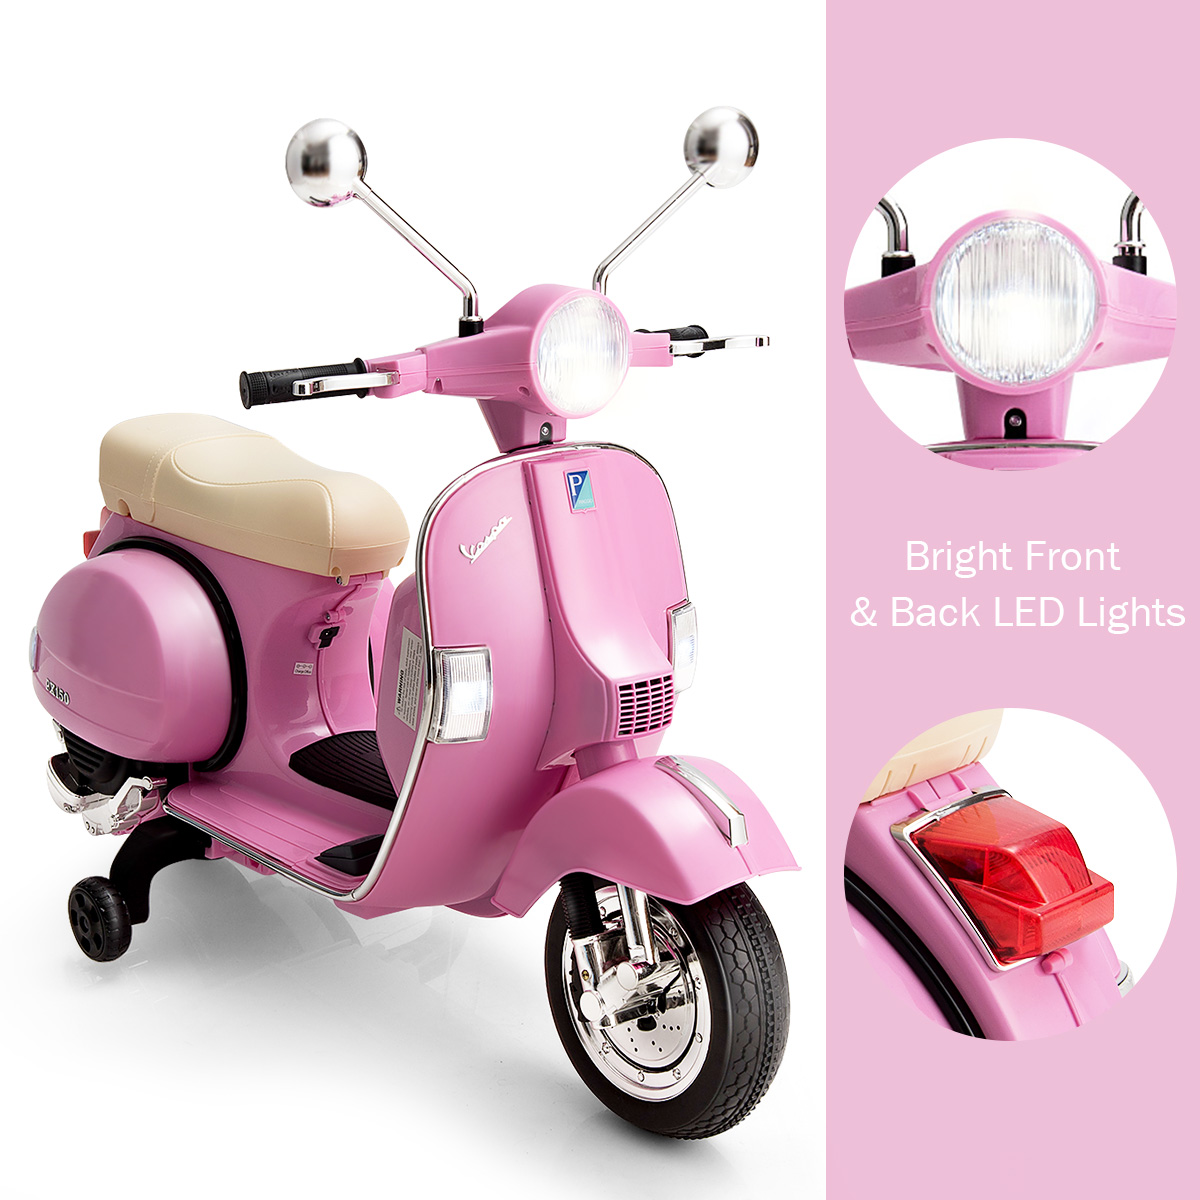 Costway Kids Vespa Scooter, 6V Rechargeable Ride on Motorcycle w/Training Wheels Pink - image 9 of 9